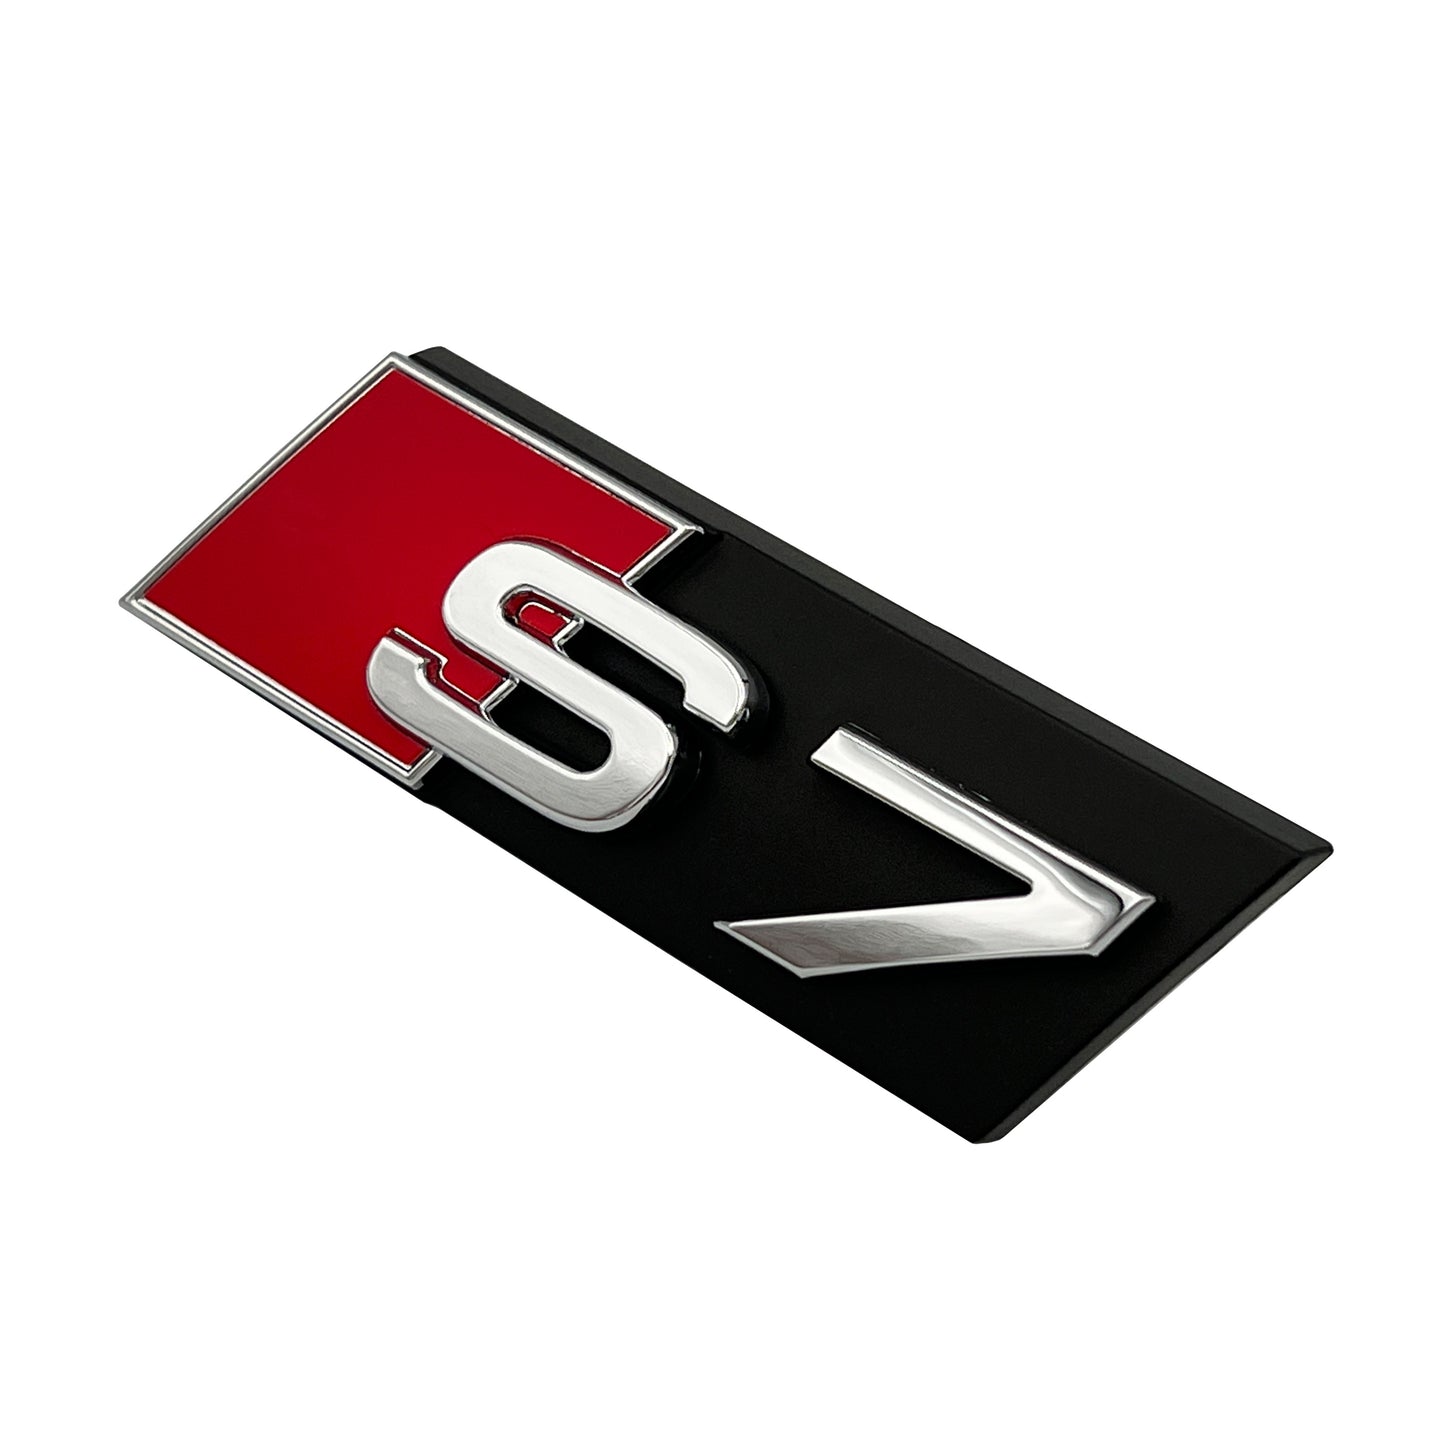 Audi S7 Front Grill Emblem Chrome fit A7 S7 Hood Grille Badge Nameplate